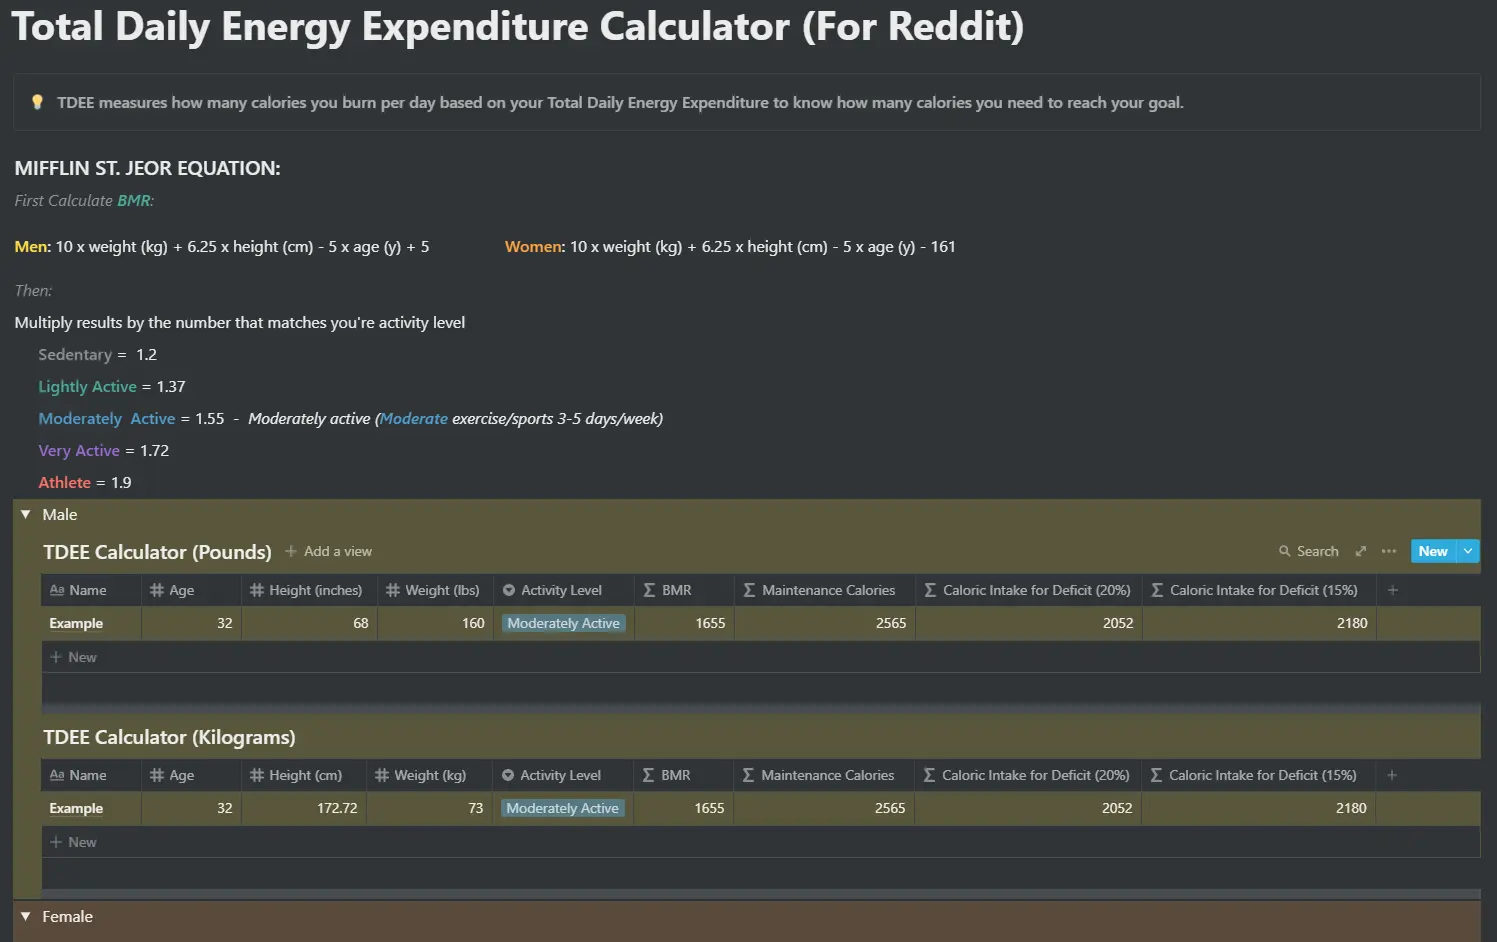 Total Daily Energy Expenditure Calculator image